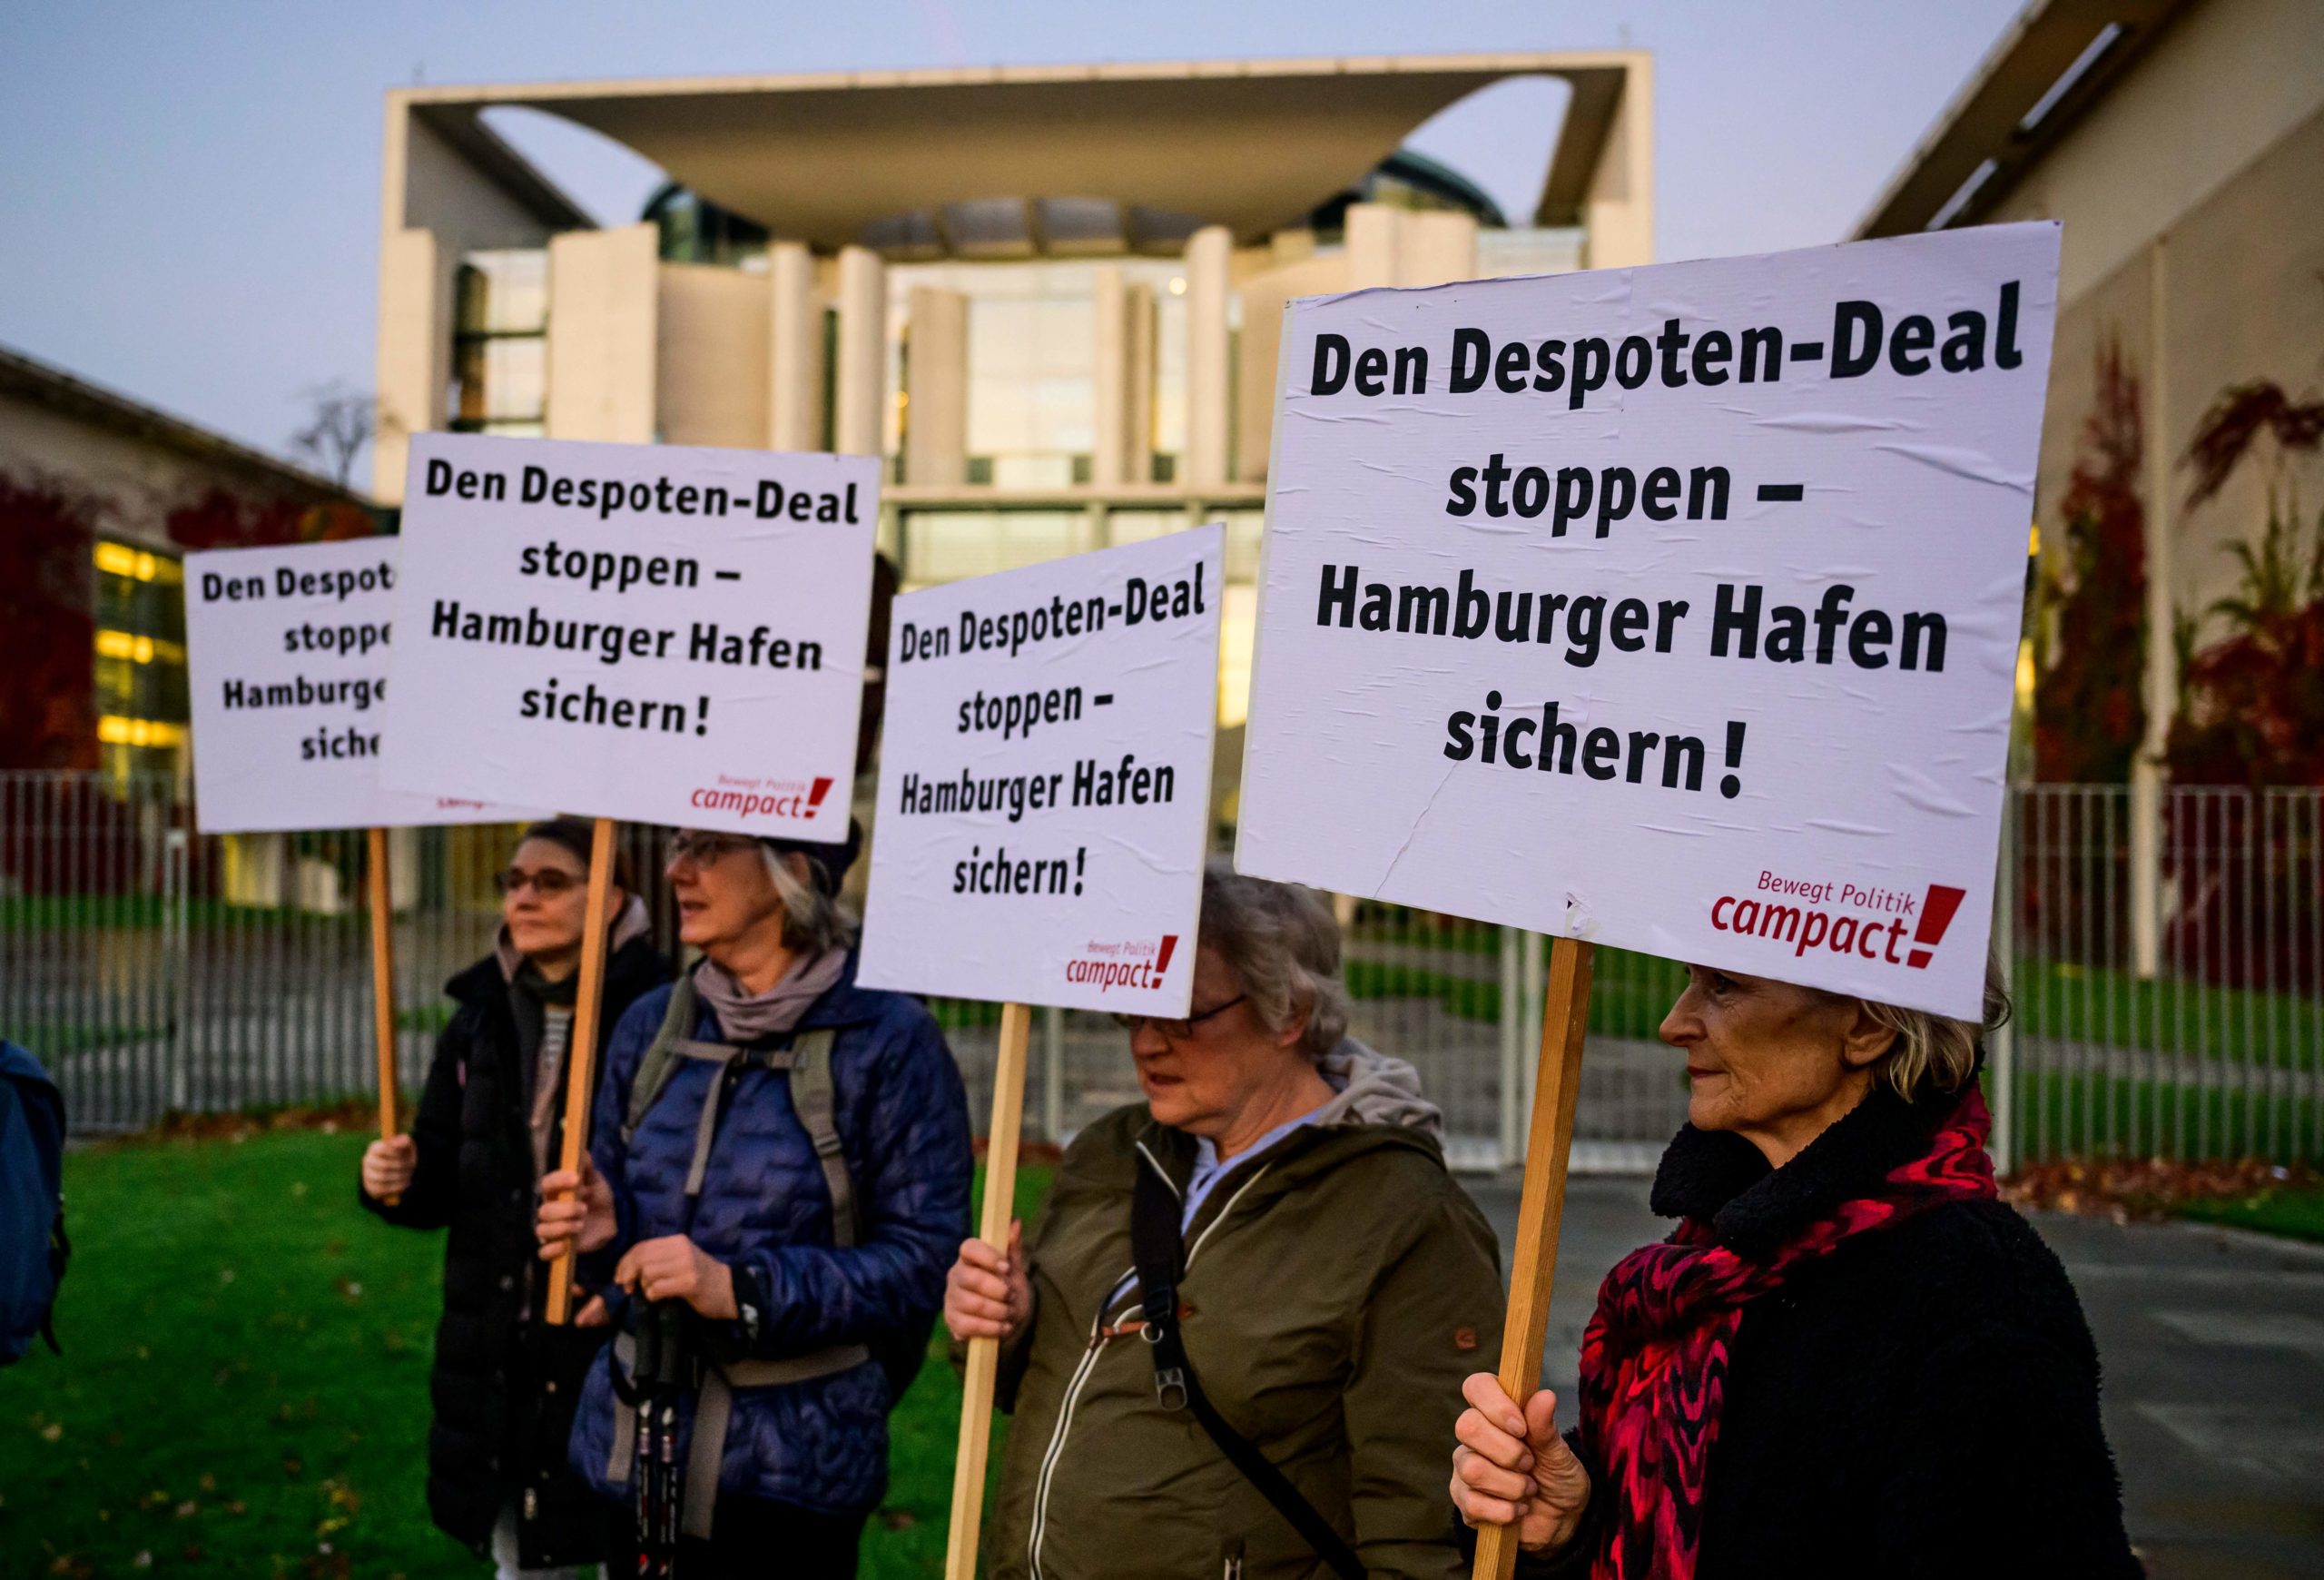 Activists display placards reading: "Stop the despot deal, secure Hamburg's port" during a protest in front of the chancellery in Berlin on October 26, 2022, referring to Chinese shipping firm Cosco's plan to acquire a major stake in a container terminal at the port. - The German government approved a controversial Chinese investment in a Hamburg port but limited the scale of the purchase, citing threats "to public order and safety."